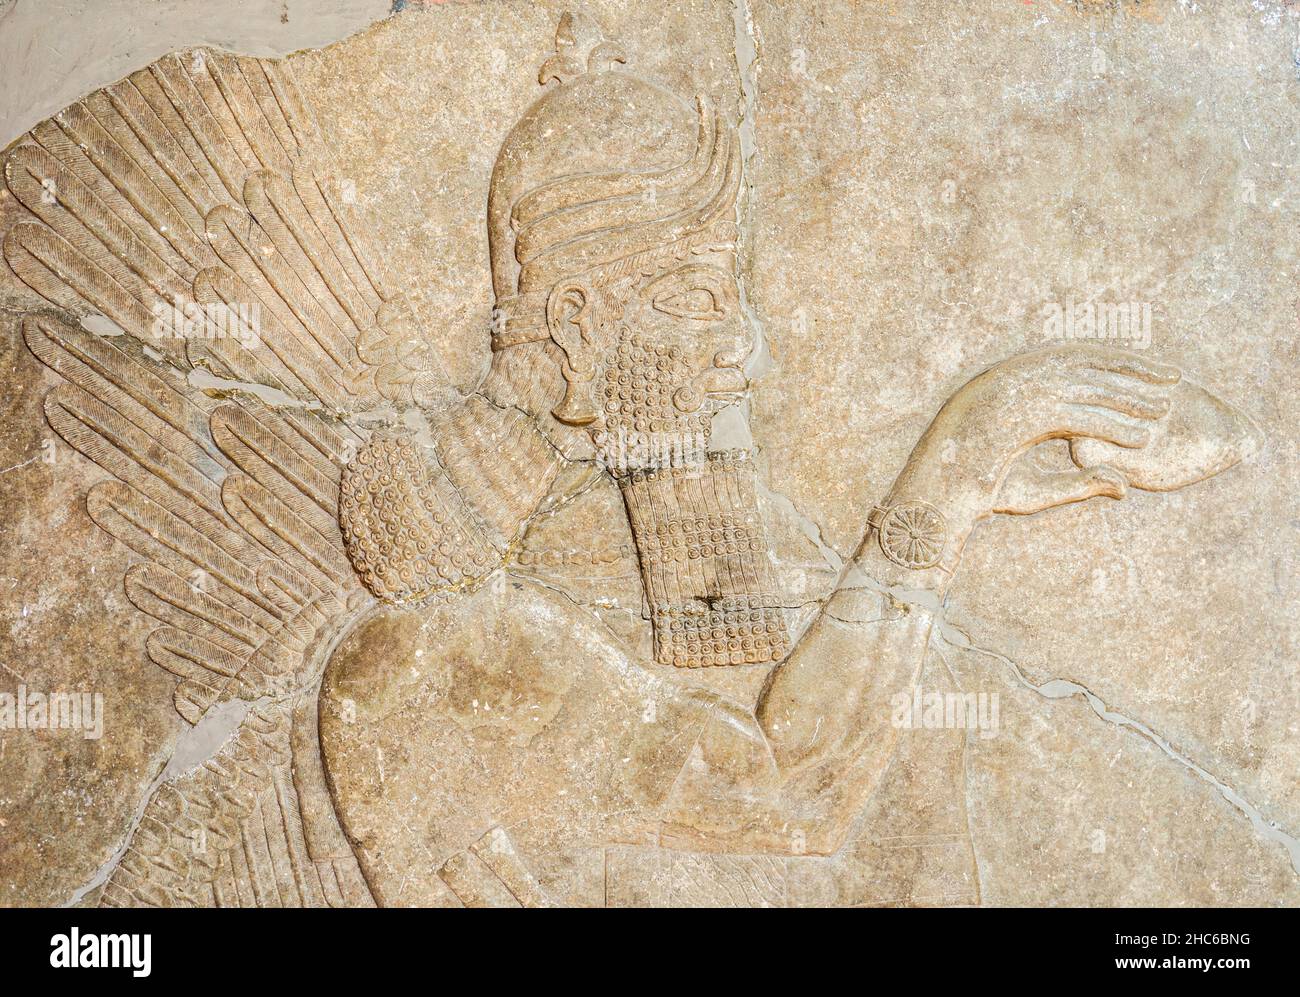 Assyrian wall relief of a winged genius. Ancient carving panel from the Middle East history. Remains of the culture of ancient Assyrian and Sumerian. Stock Photo